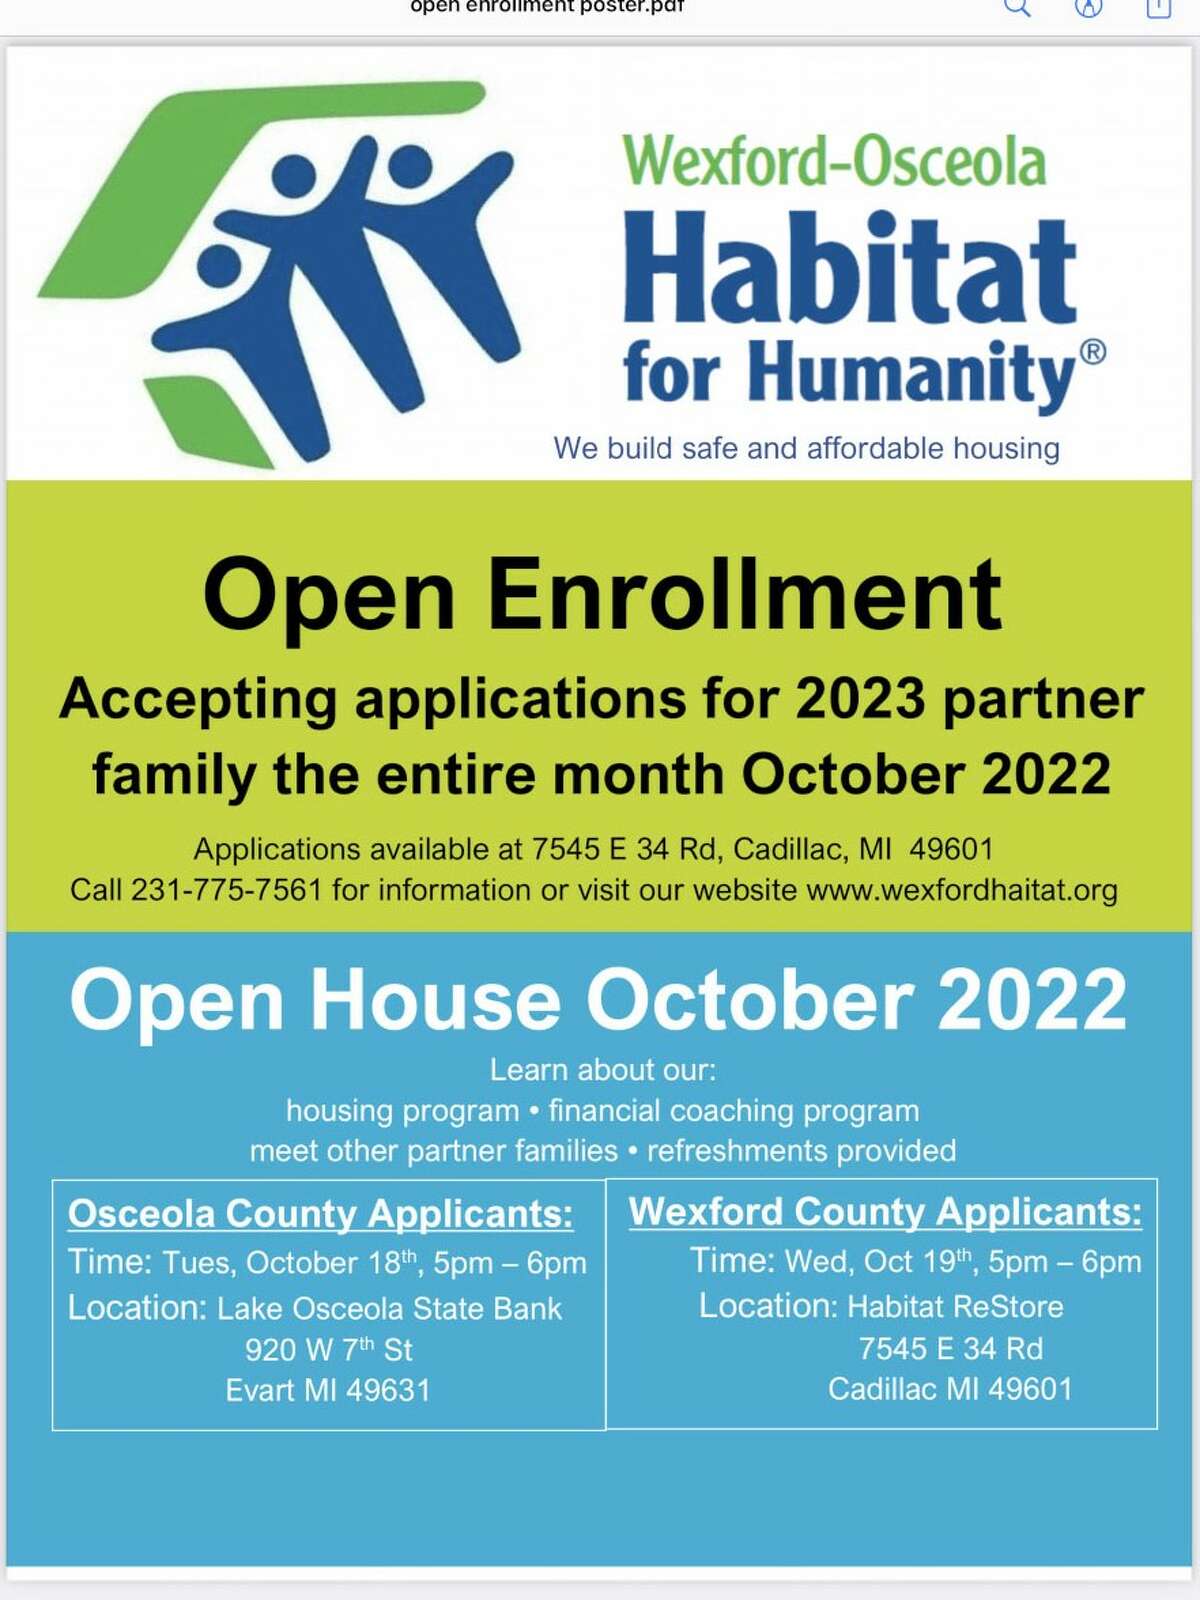 Wexford-Osceola Habitat for Humanity is holding open enrollment for partner families through the month of October.